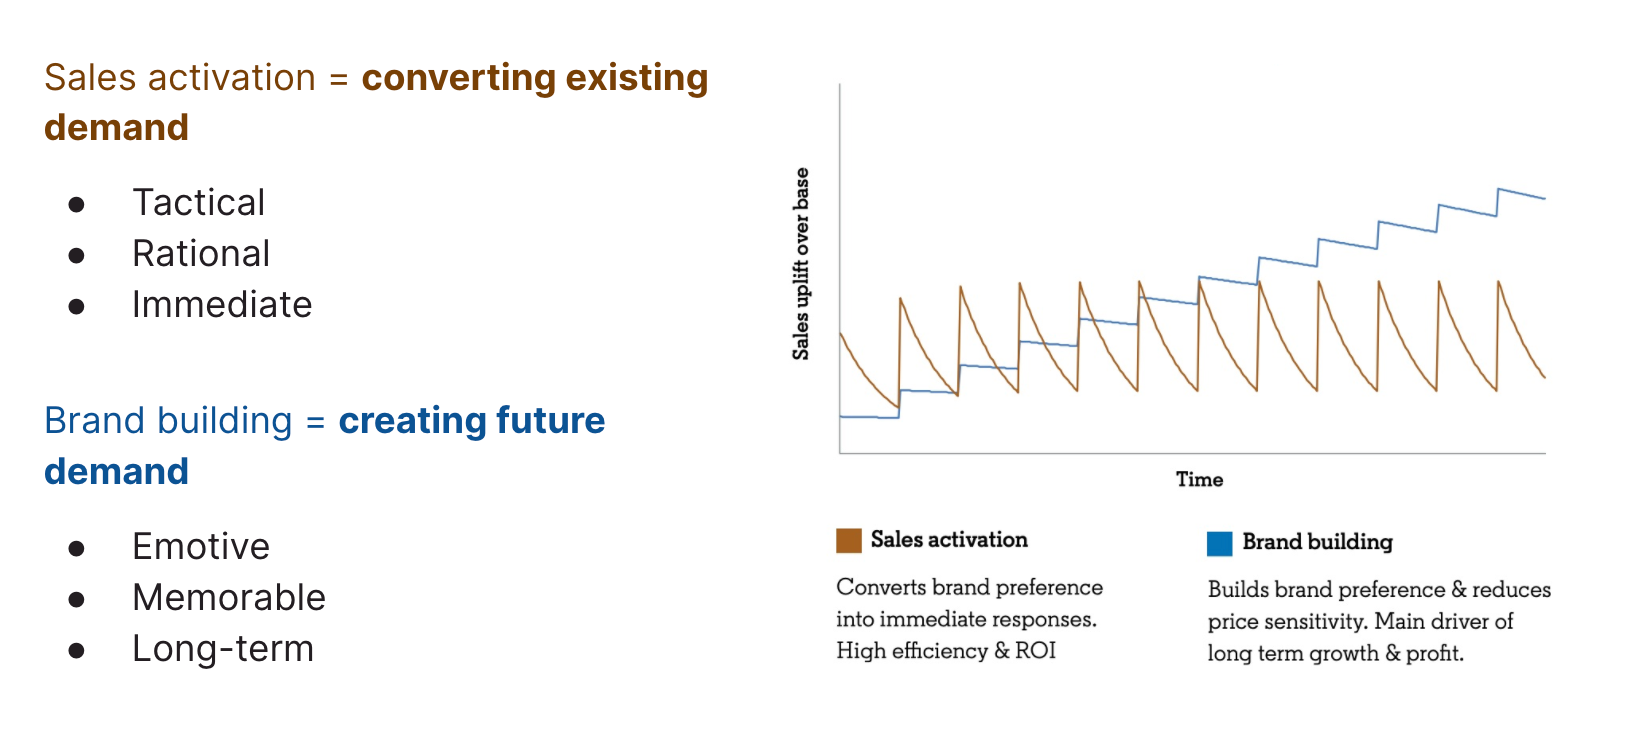 Programmatic display ad formats can support brand building 